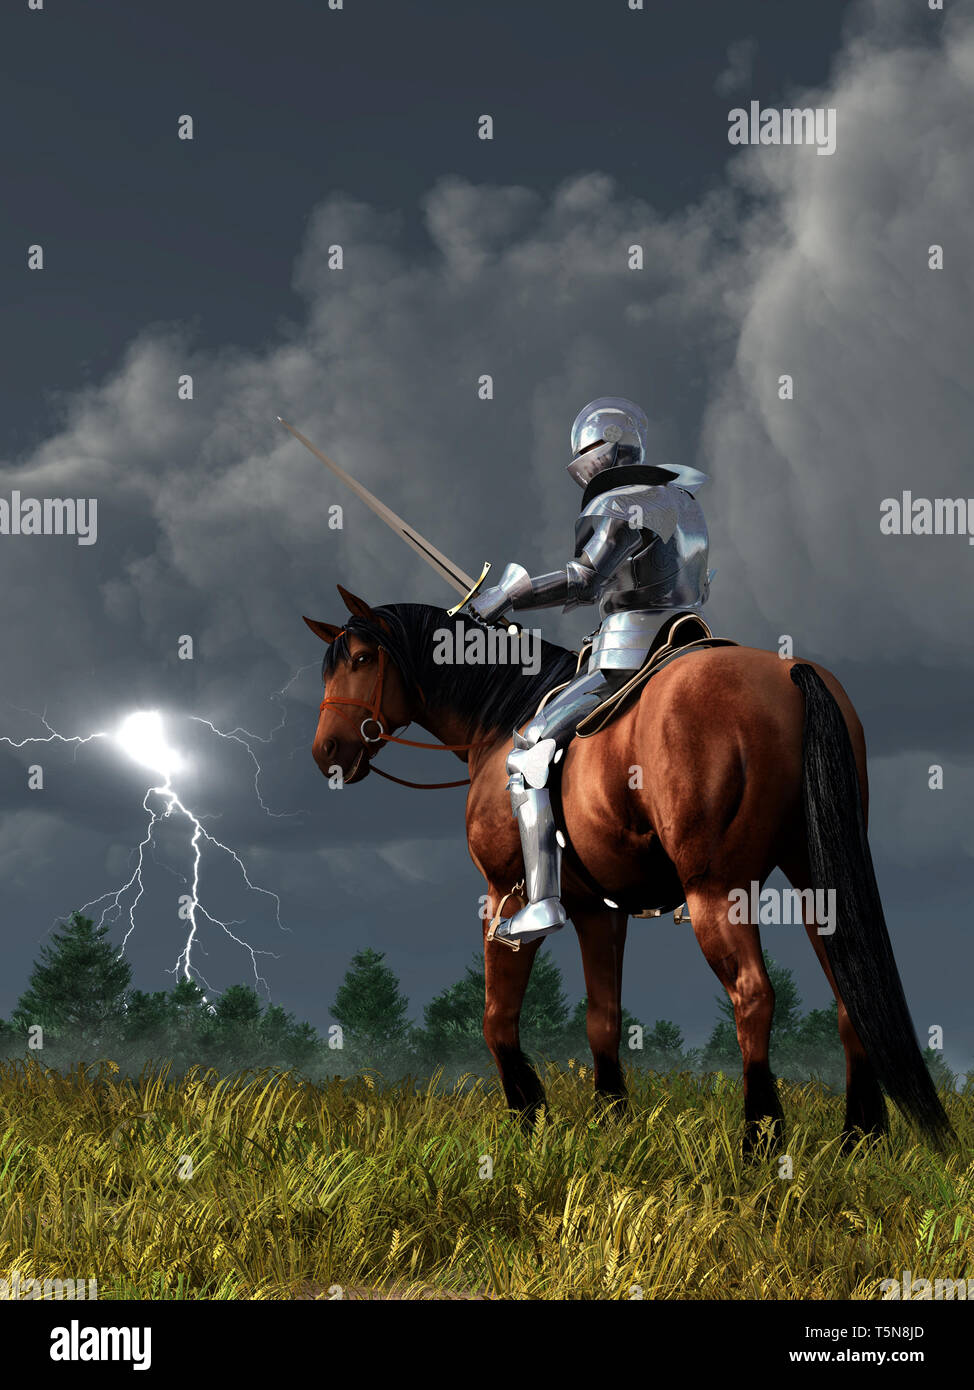 A knight on horseback in shining armor looks down at the sword in his hand as lightning strikes off in the distance.  His horse looks back, worried. Stock Photo